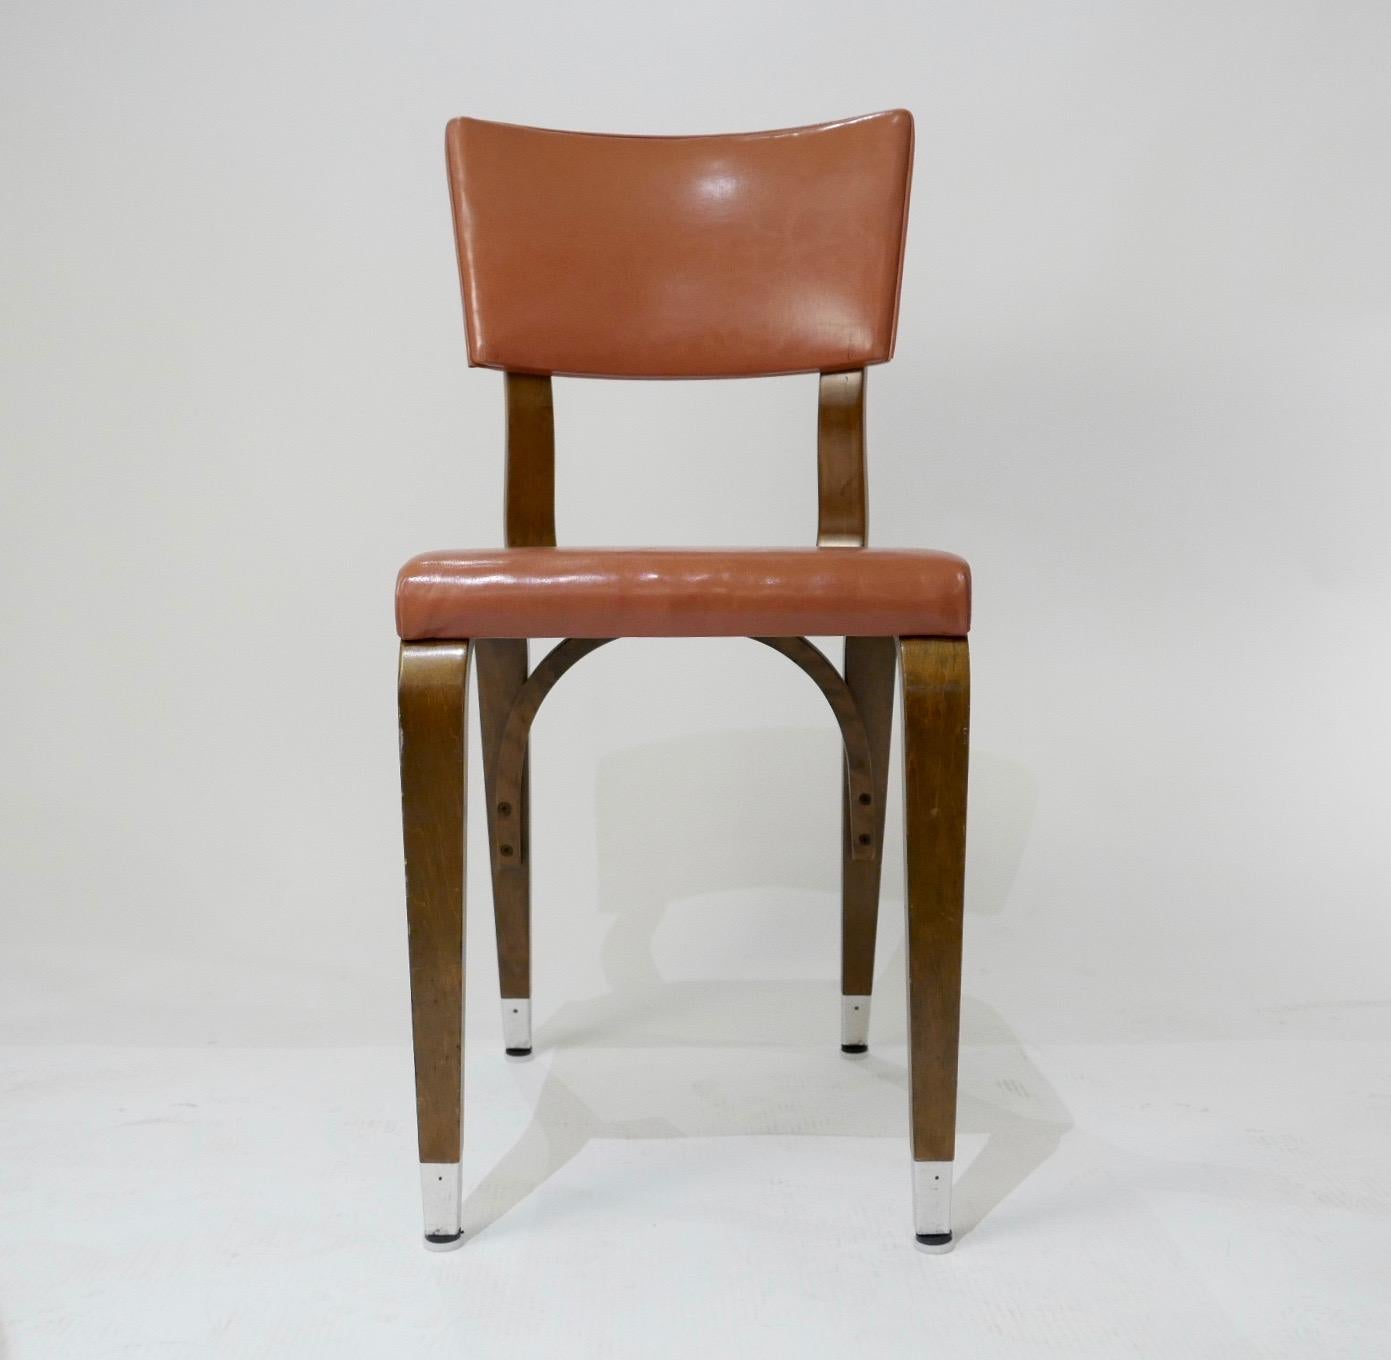 Naugahyde Set of 6 1950s Thonet Padded Bentwood Bent Plywood Dining, Cafe, or Desk Chairs 